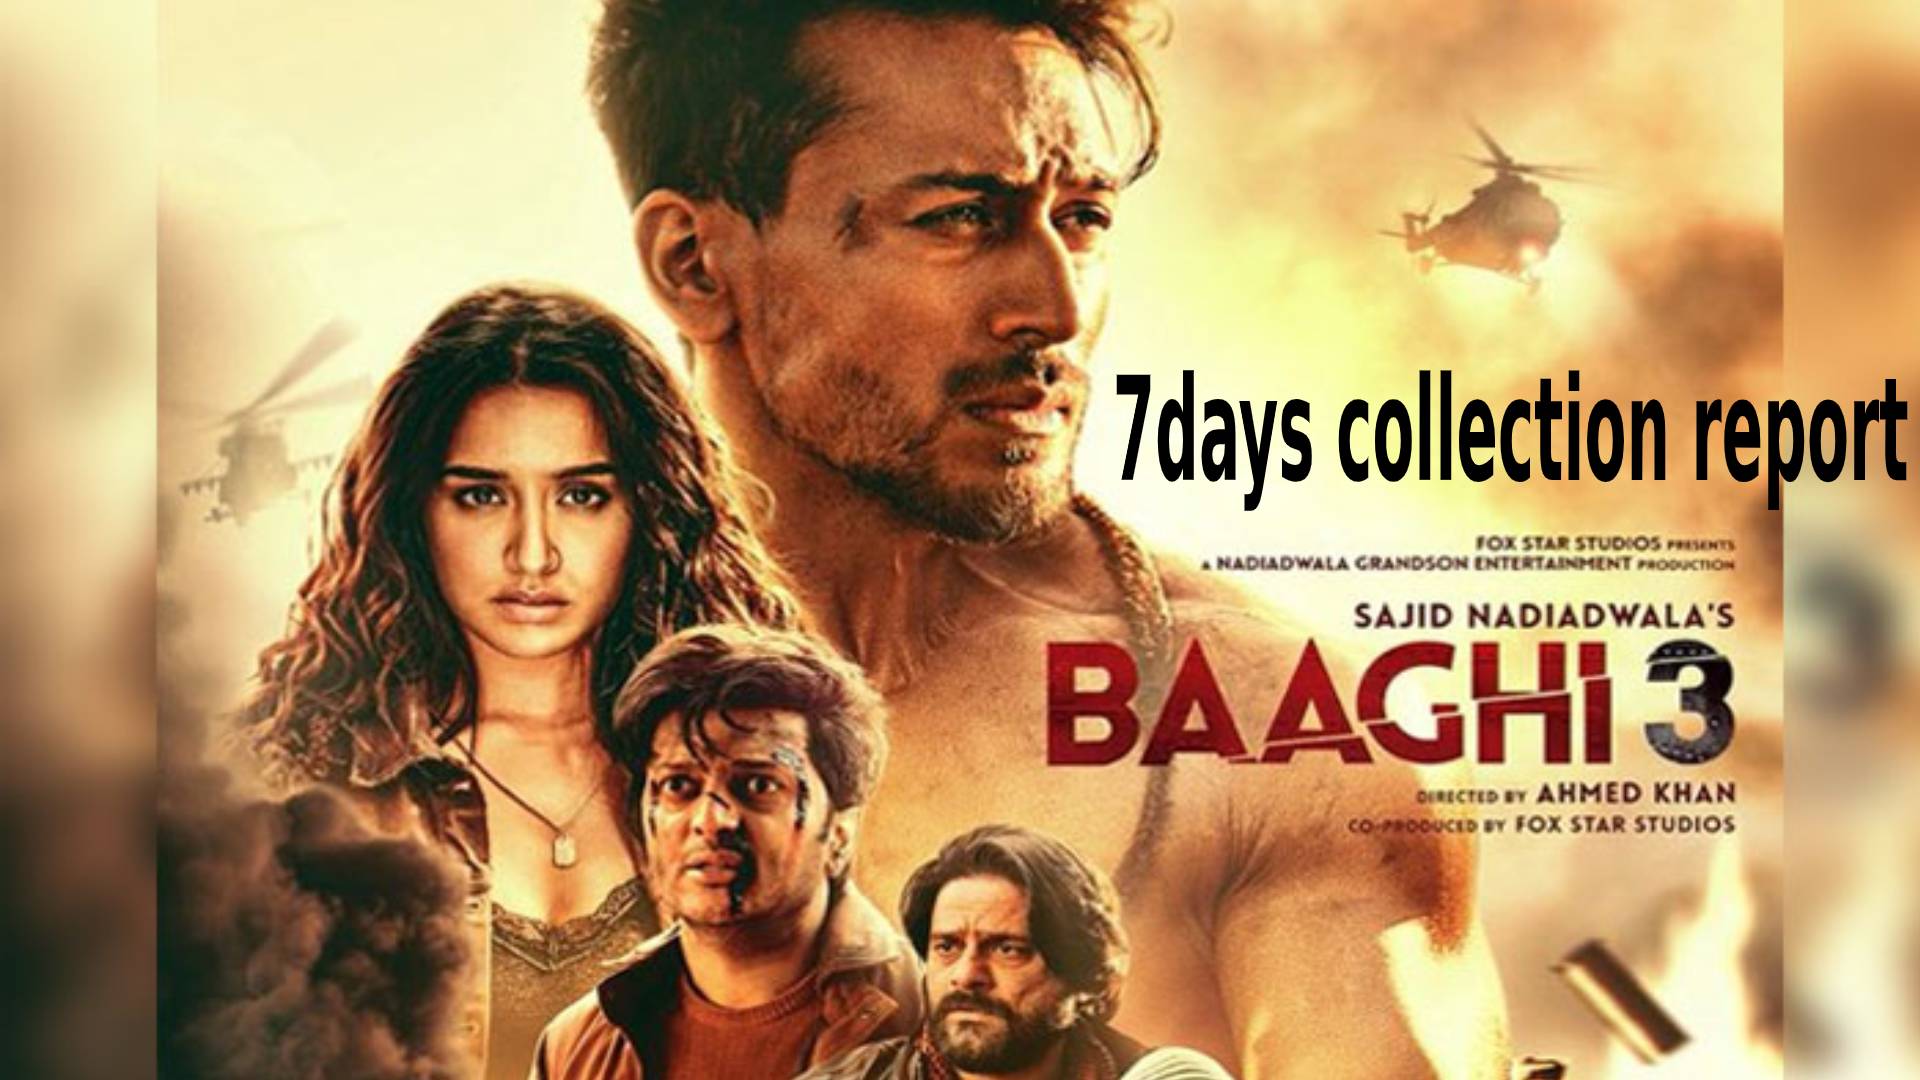 7 days collection of Baaghi 3 – 100 crore or not?